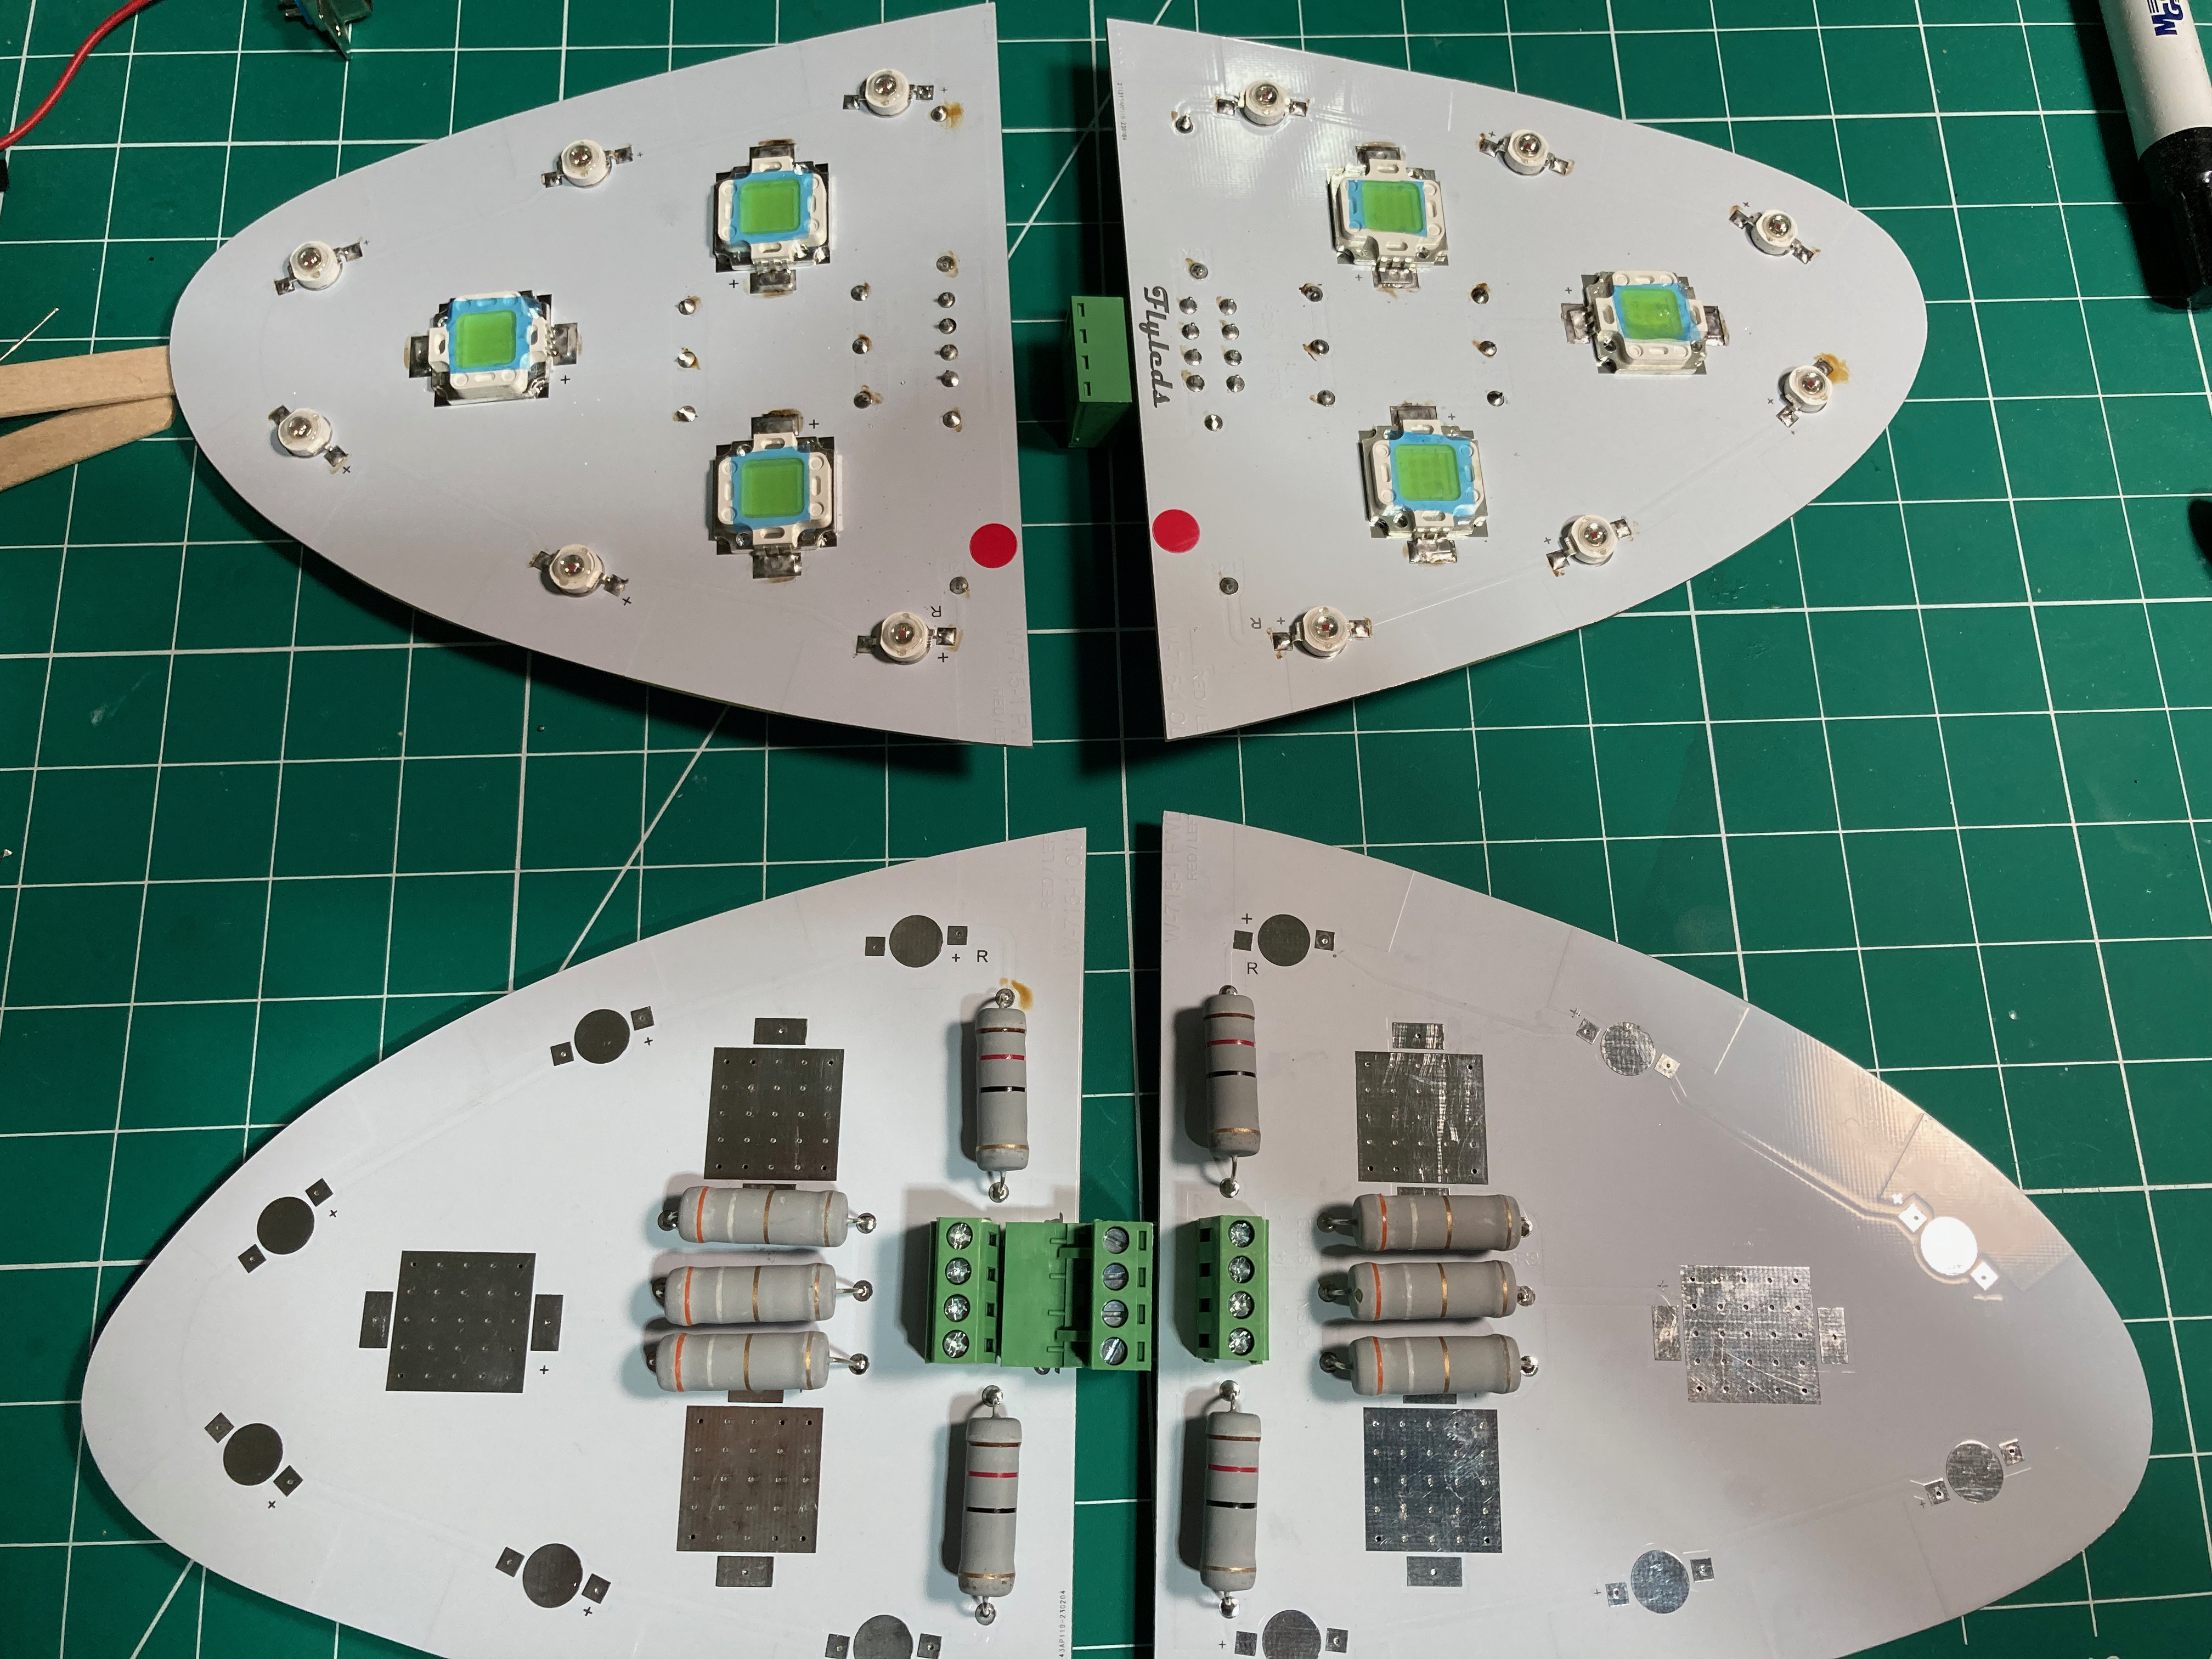 Wing boards soldered.